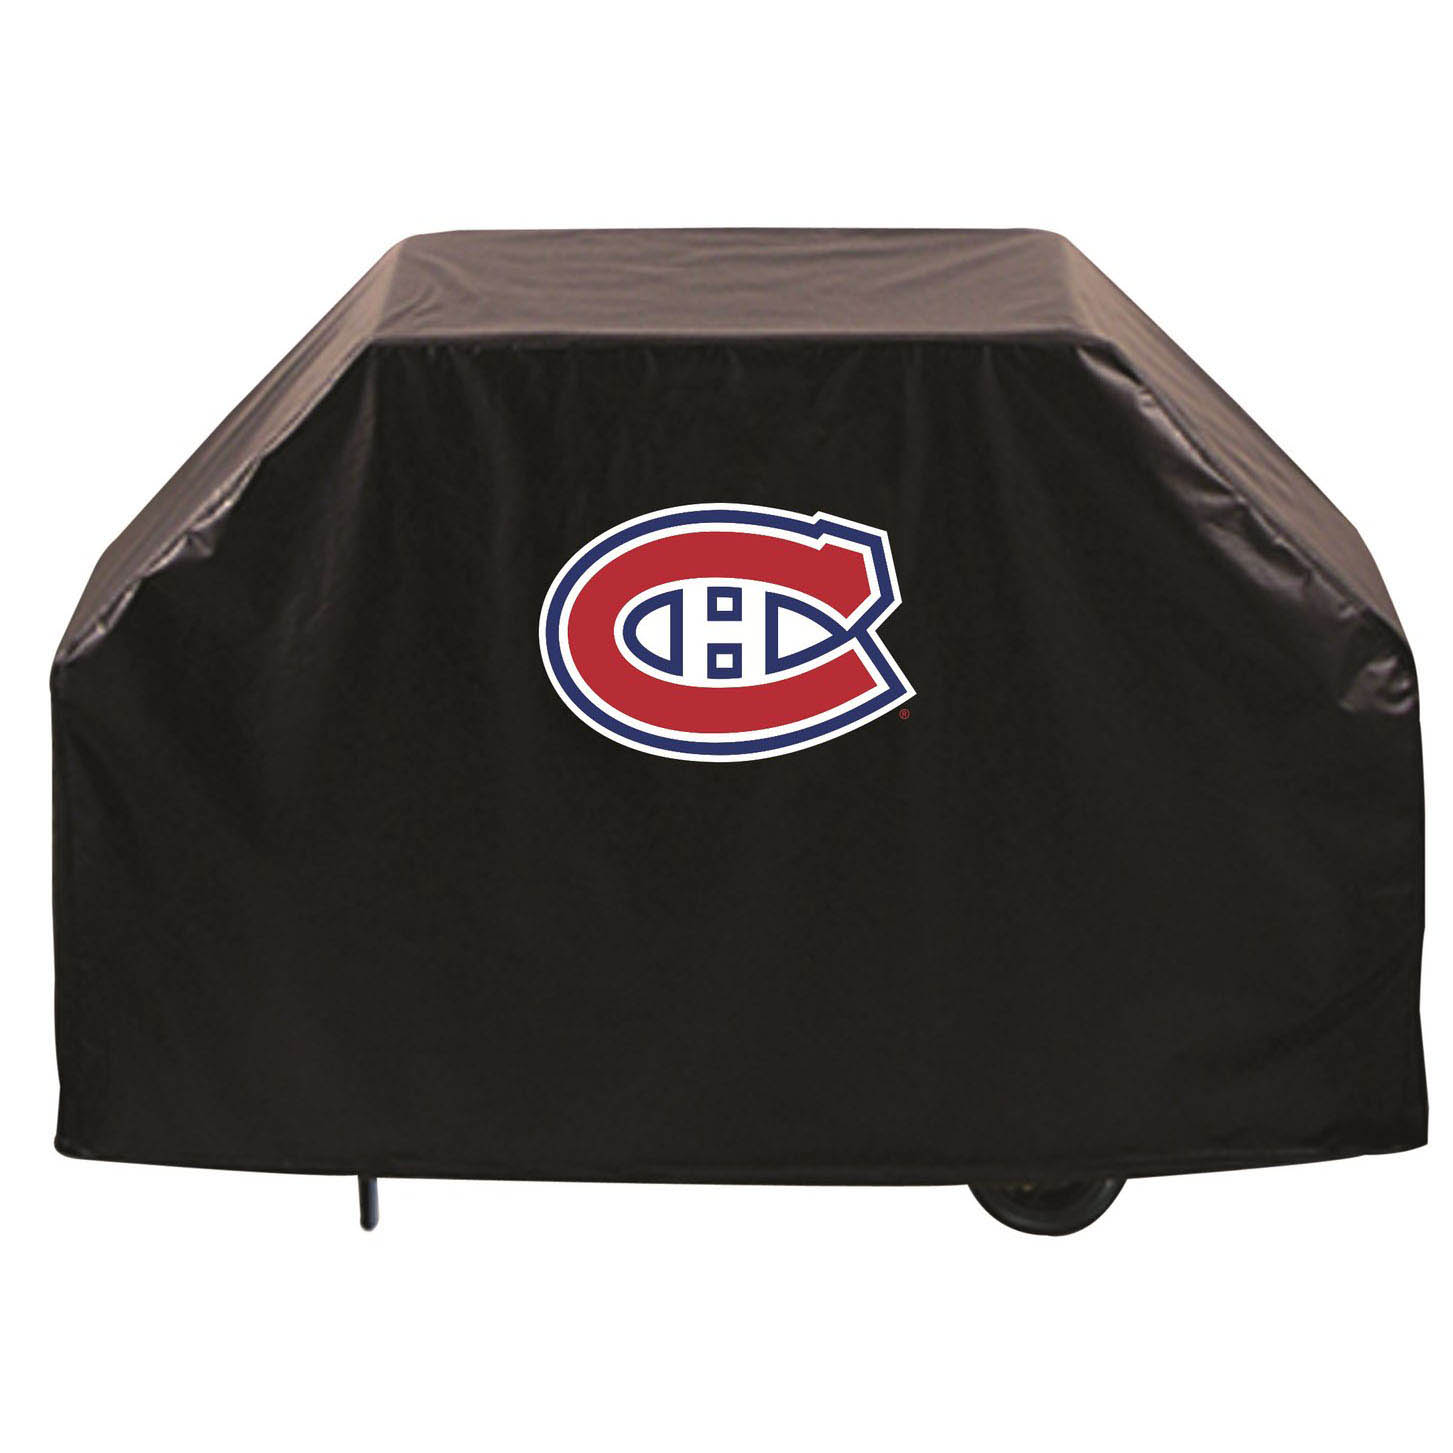 Montreal Canadiens Grill Cover